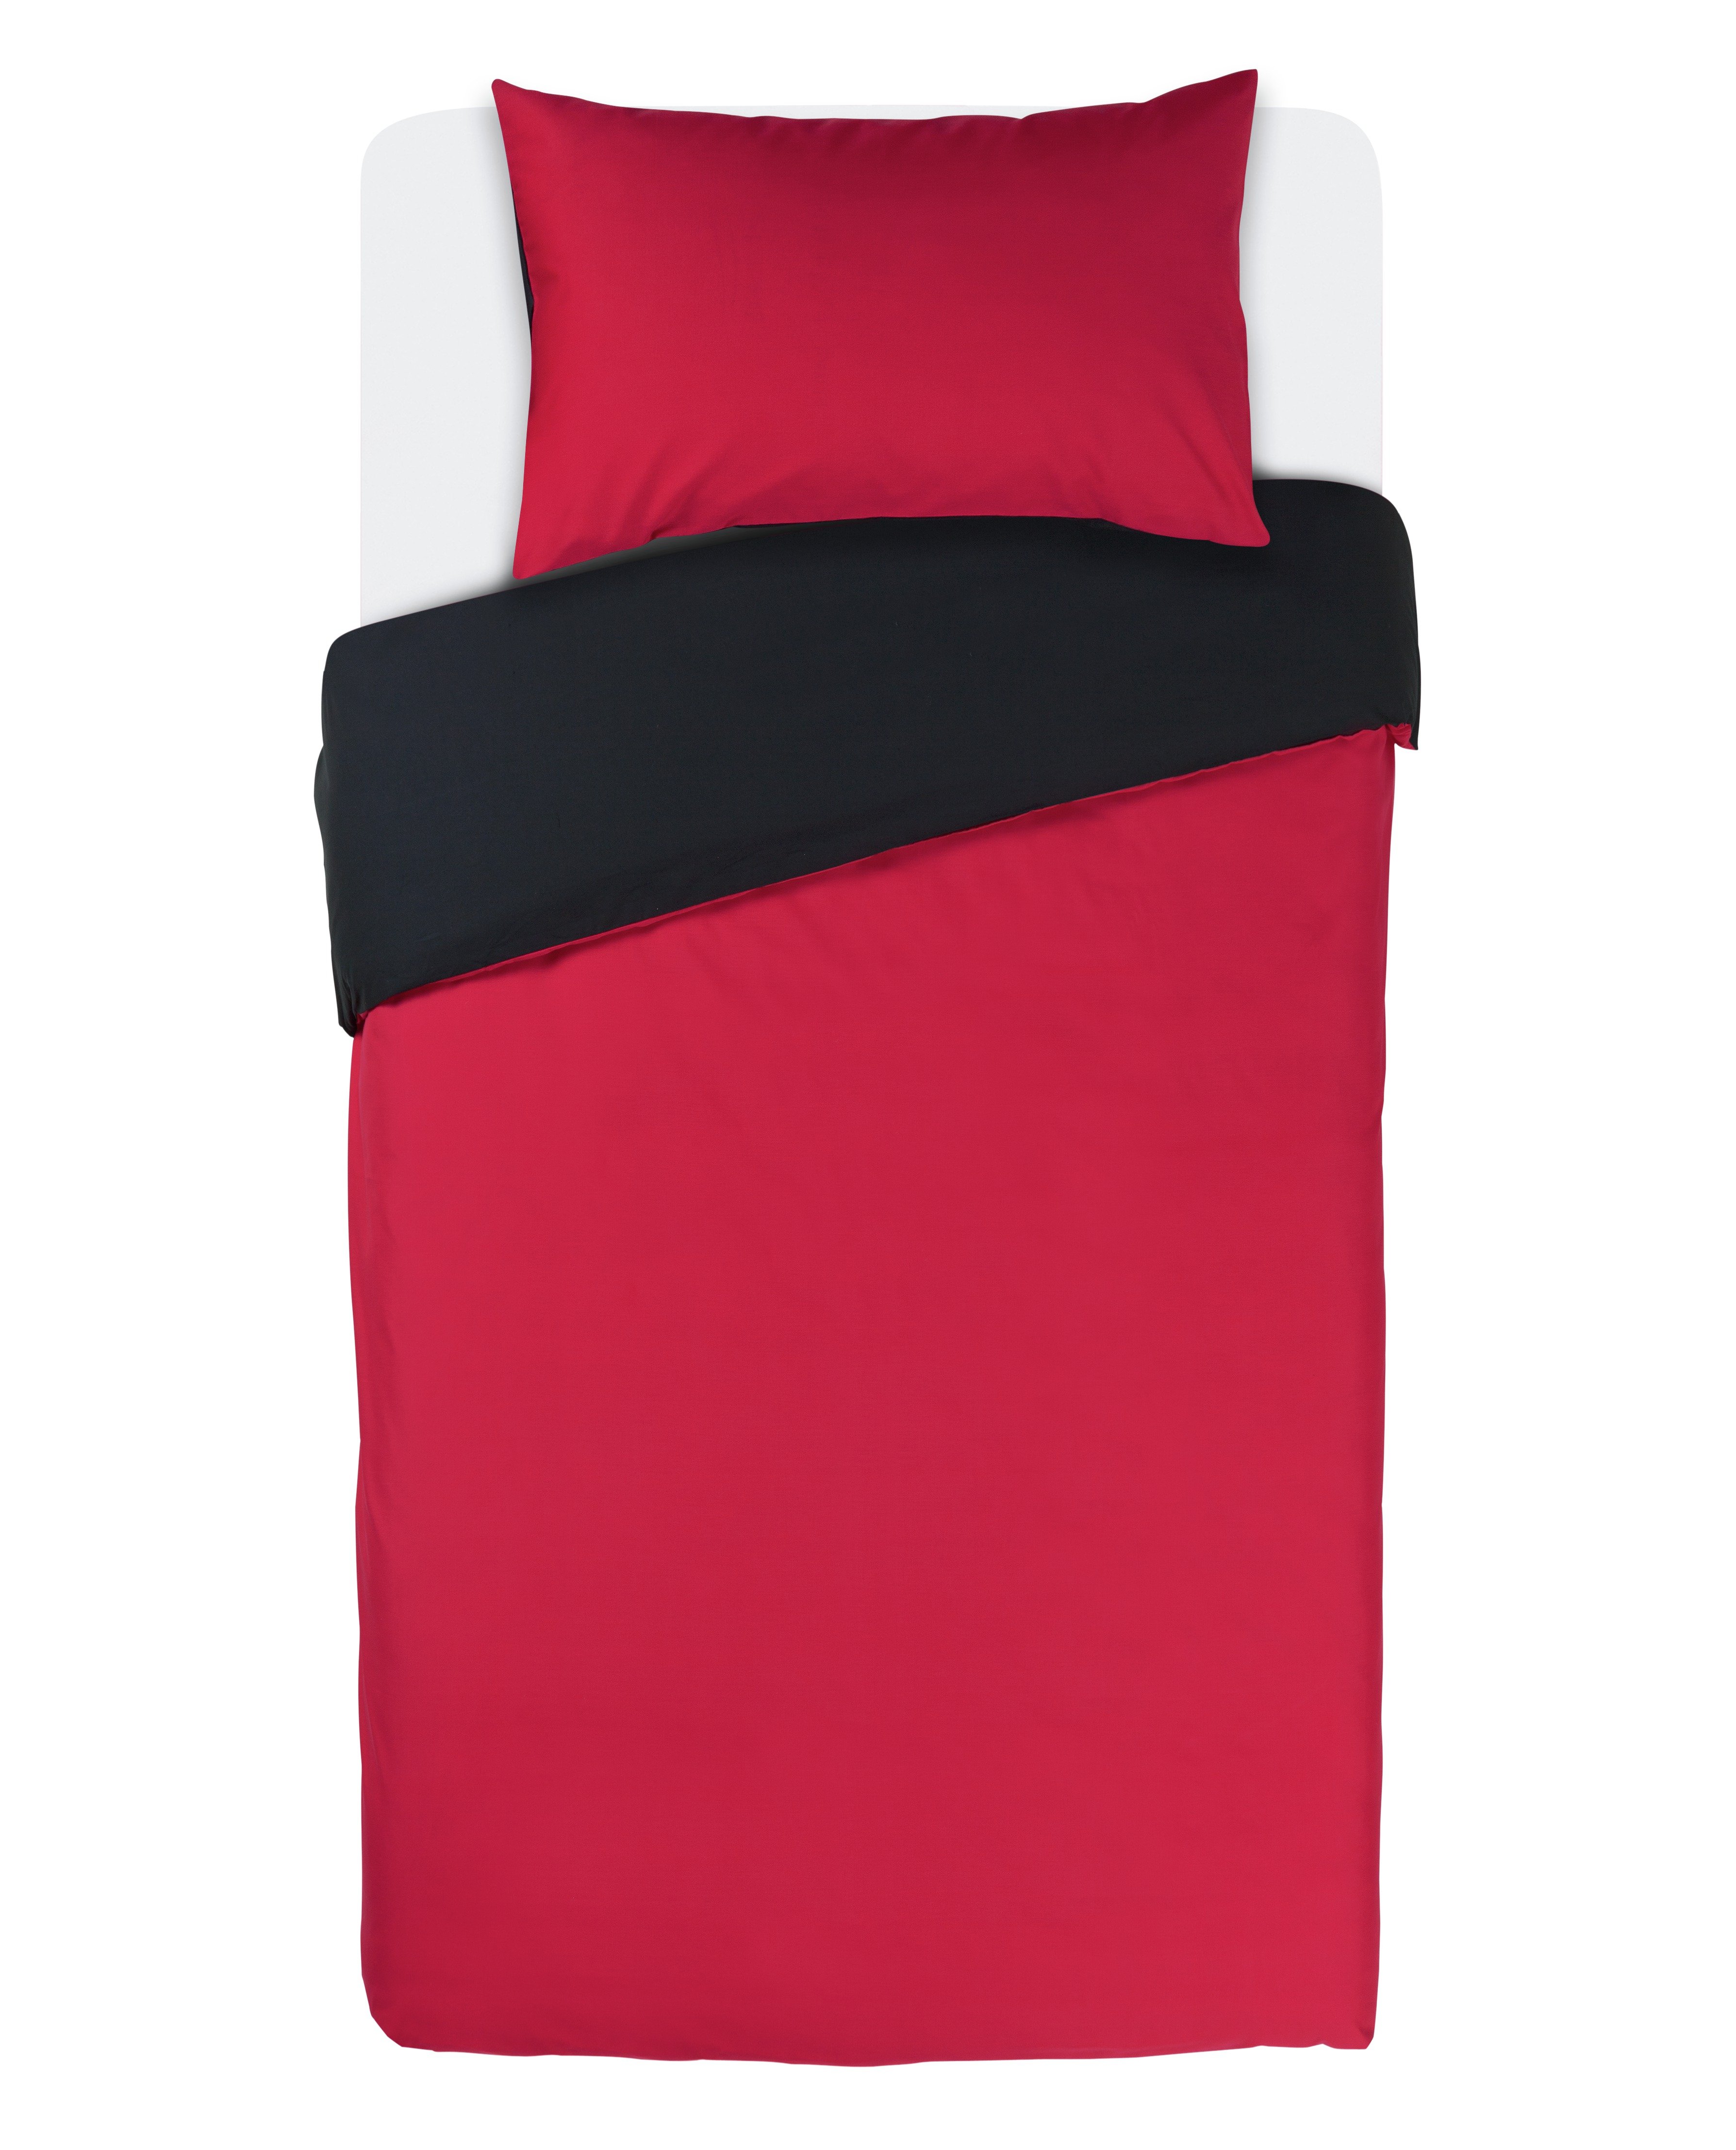 ColourMatch by Argos Poppy Red/ Black Bedding Set review